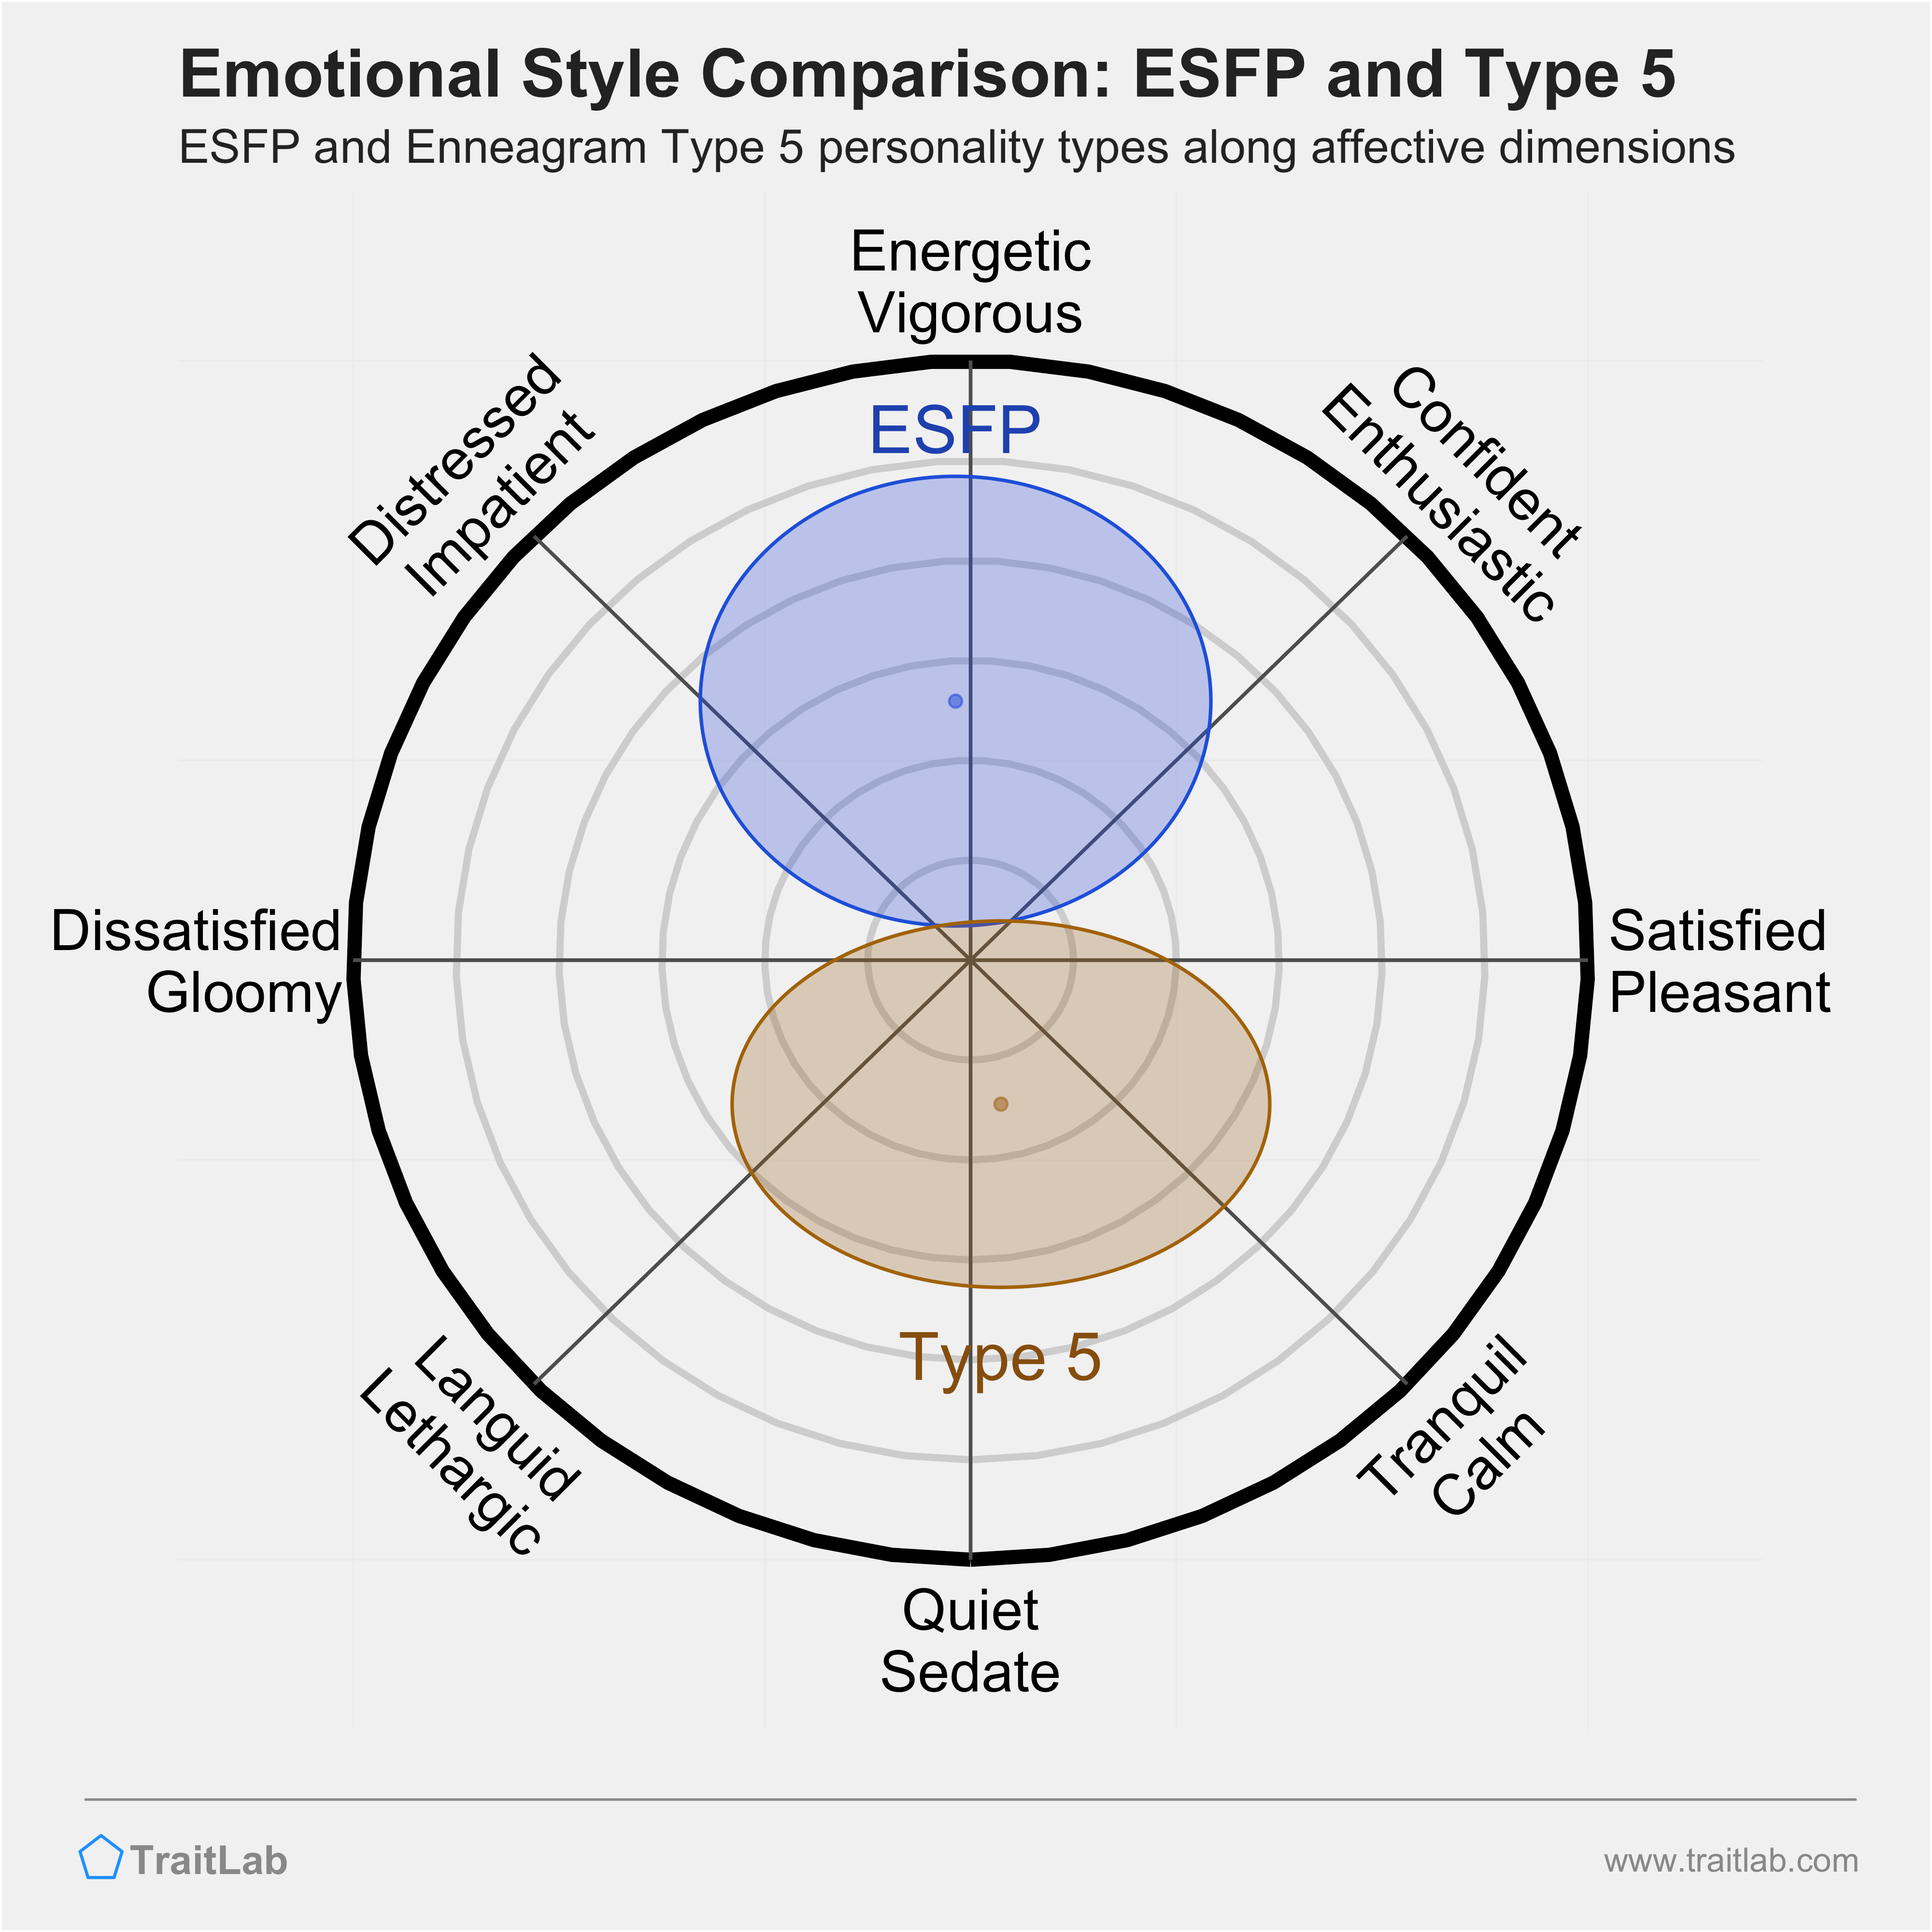 ESFP and Type 5 comparison across emotional (affective) dimensions